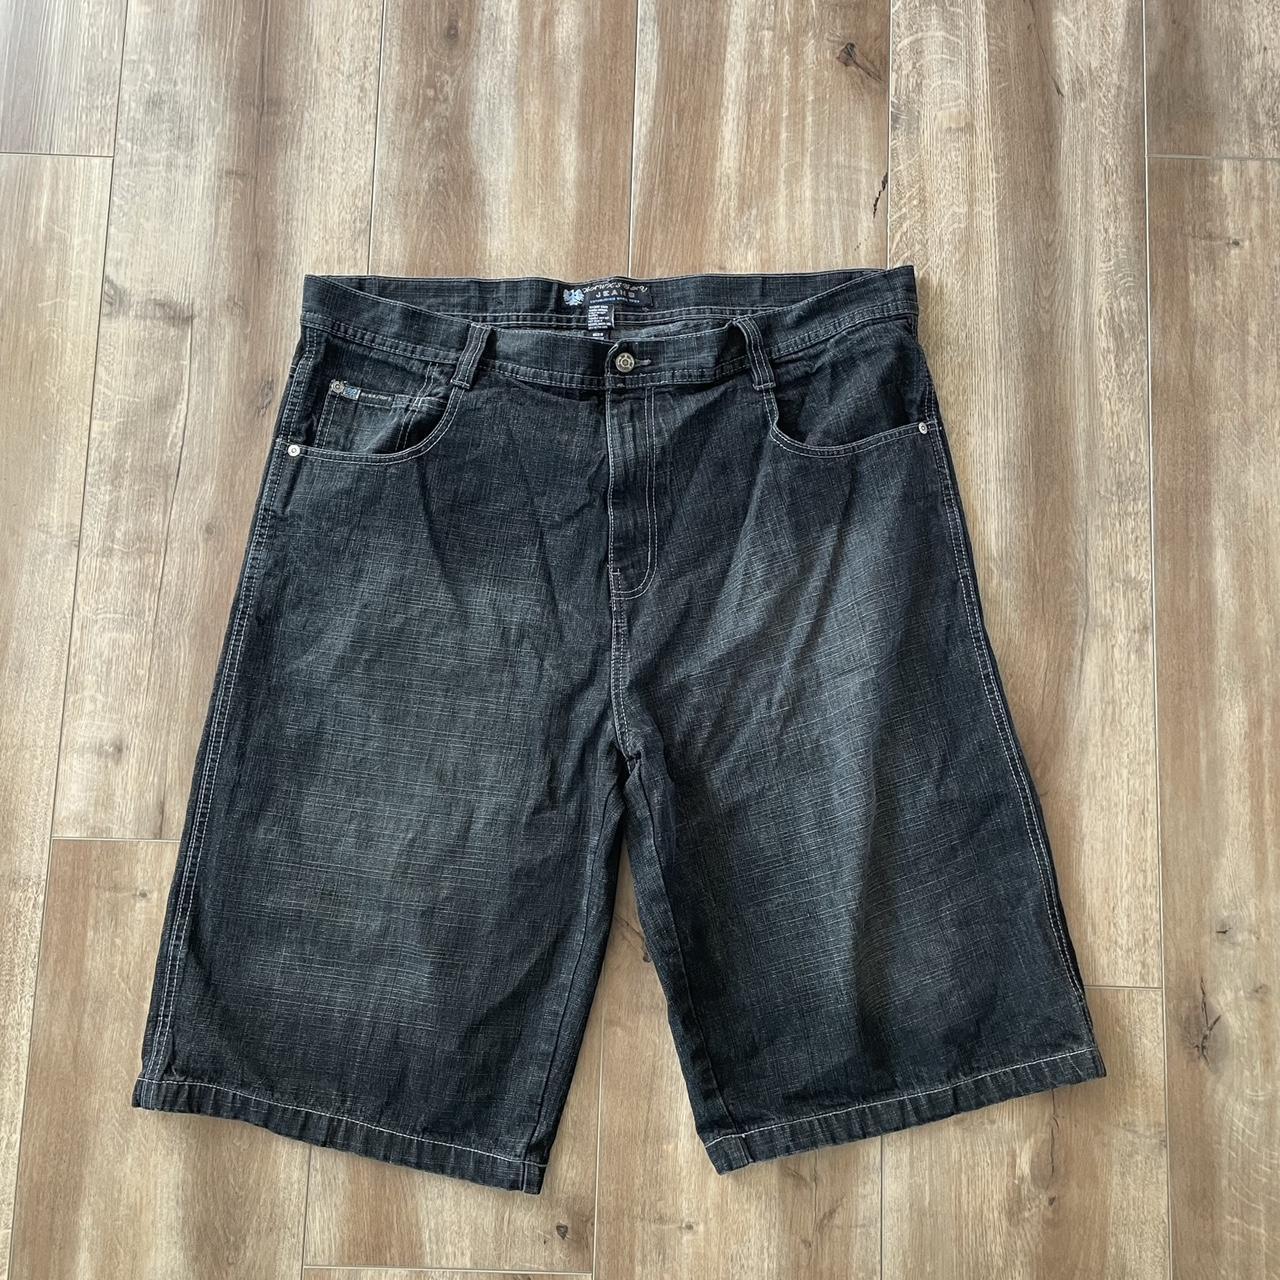 Baggy jorts Size 42 Nice fading front and back Black... - Depop